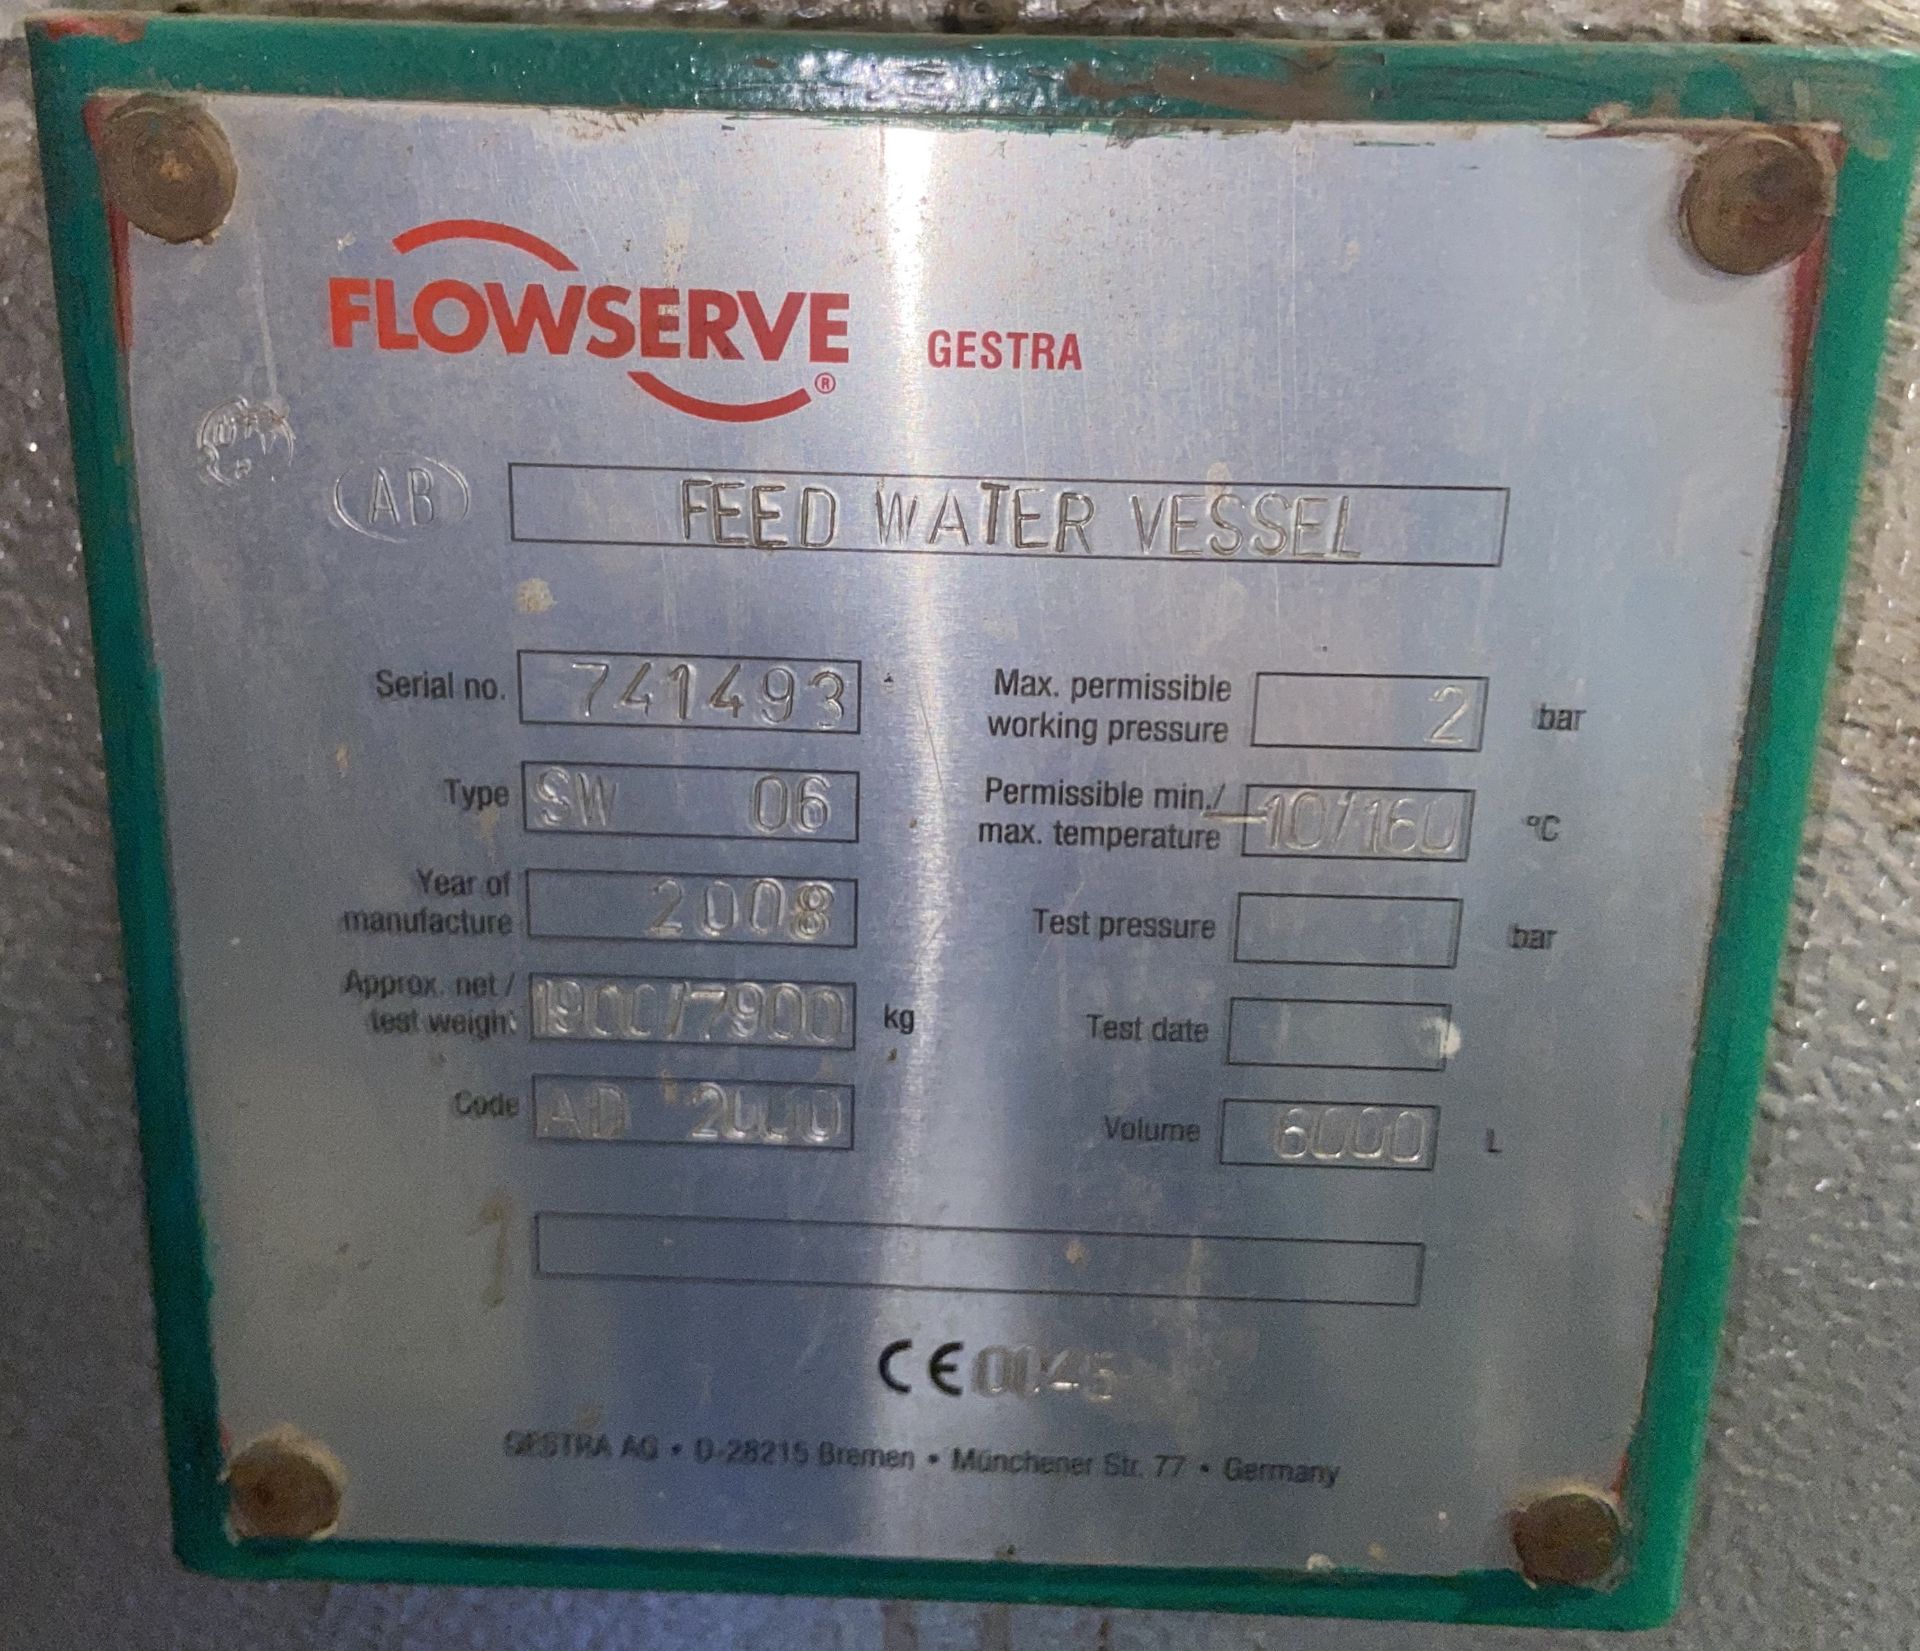 Gestre FlowServe FEED WATER VESSEL, serial no. 741493, type SW 06, year of manufacture 2008, 6,000 - Image 4 of 7